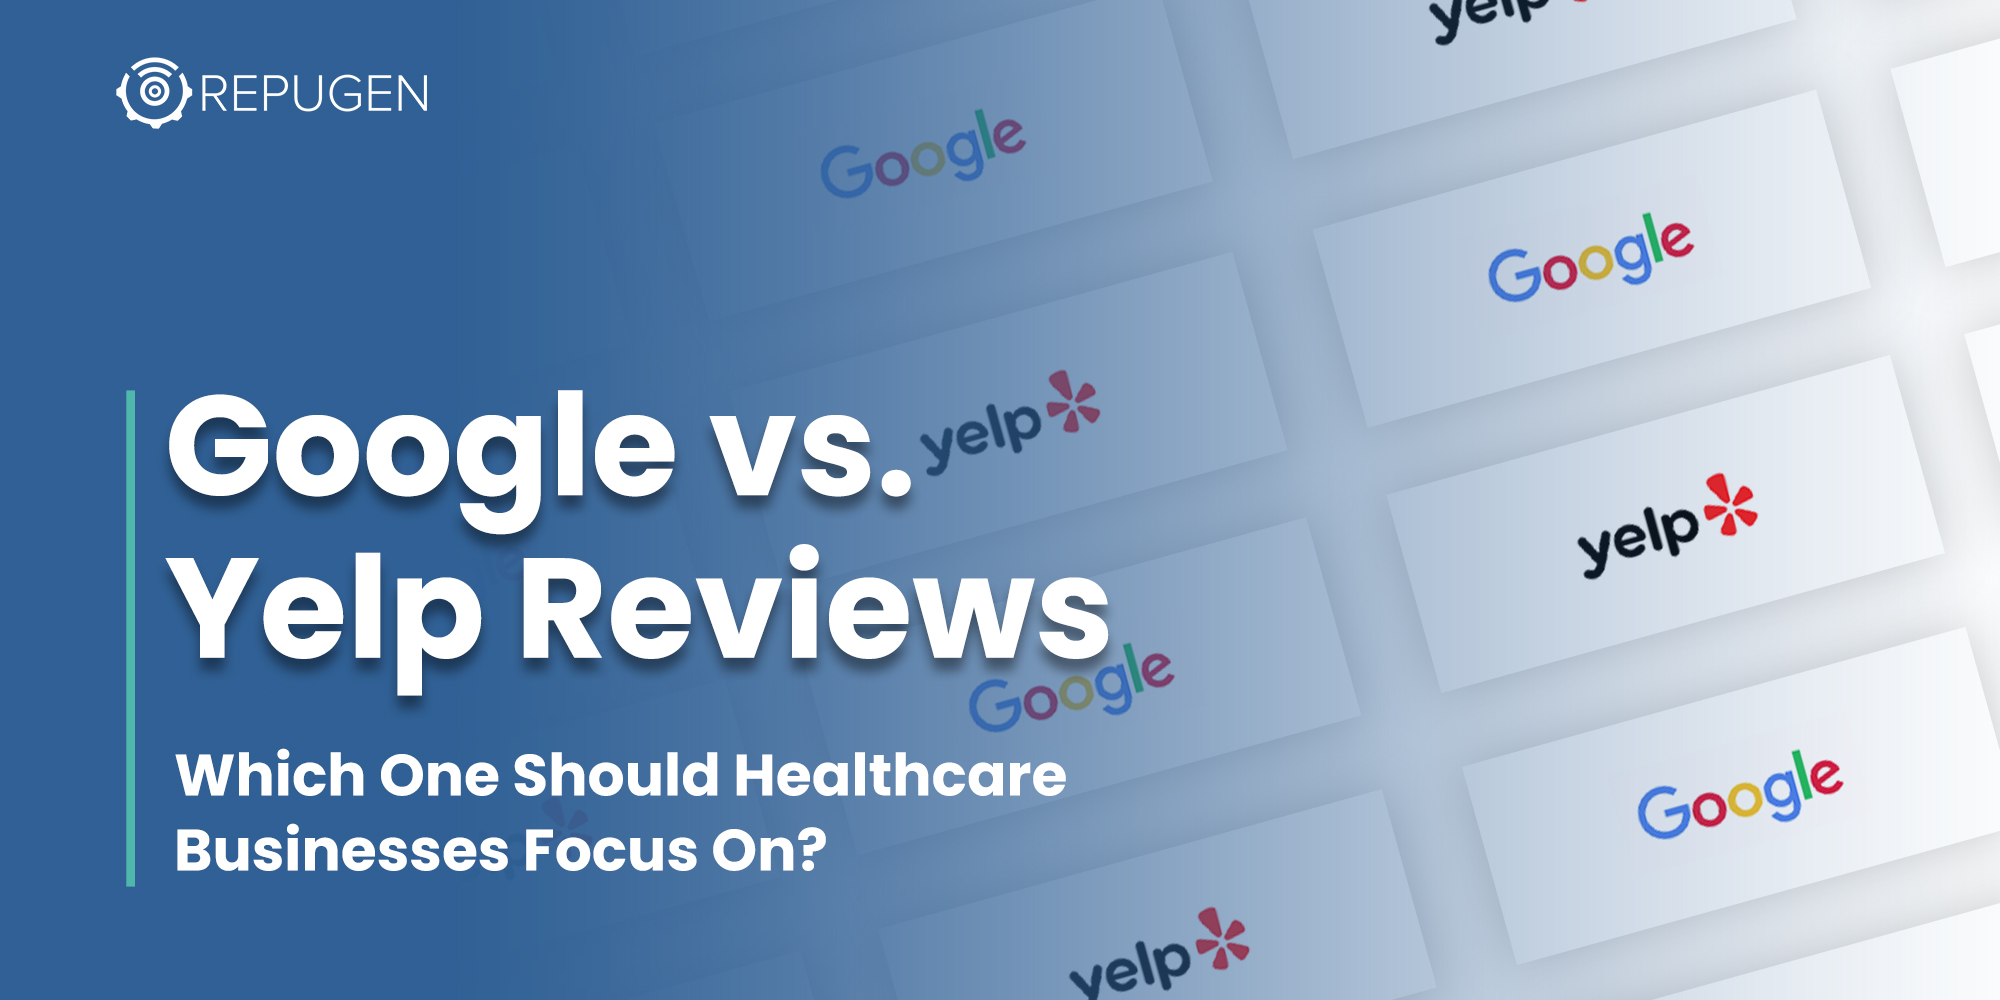 Google vs. Yelp Reviews: Which One Should Healthcare Businesses Focus On?